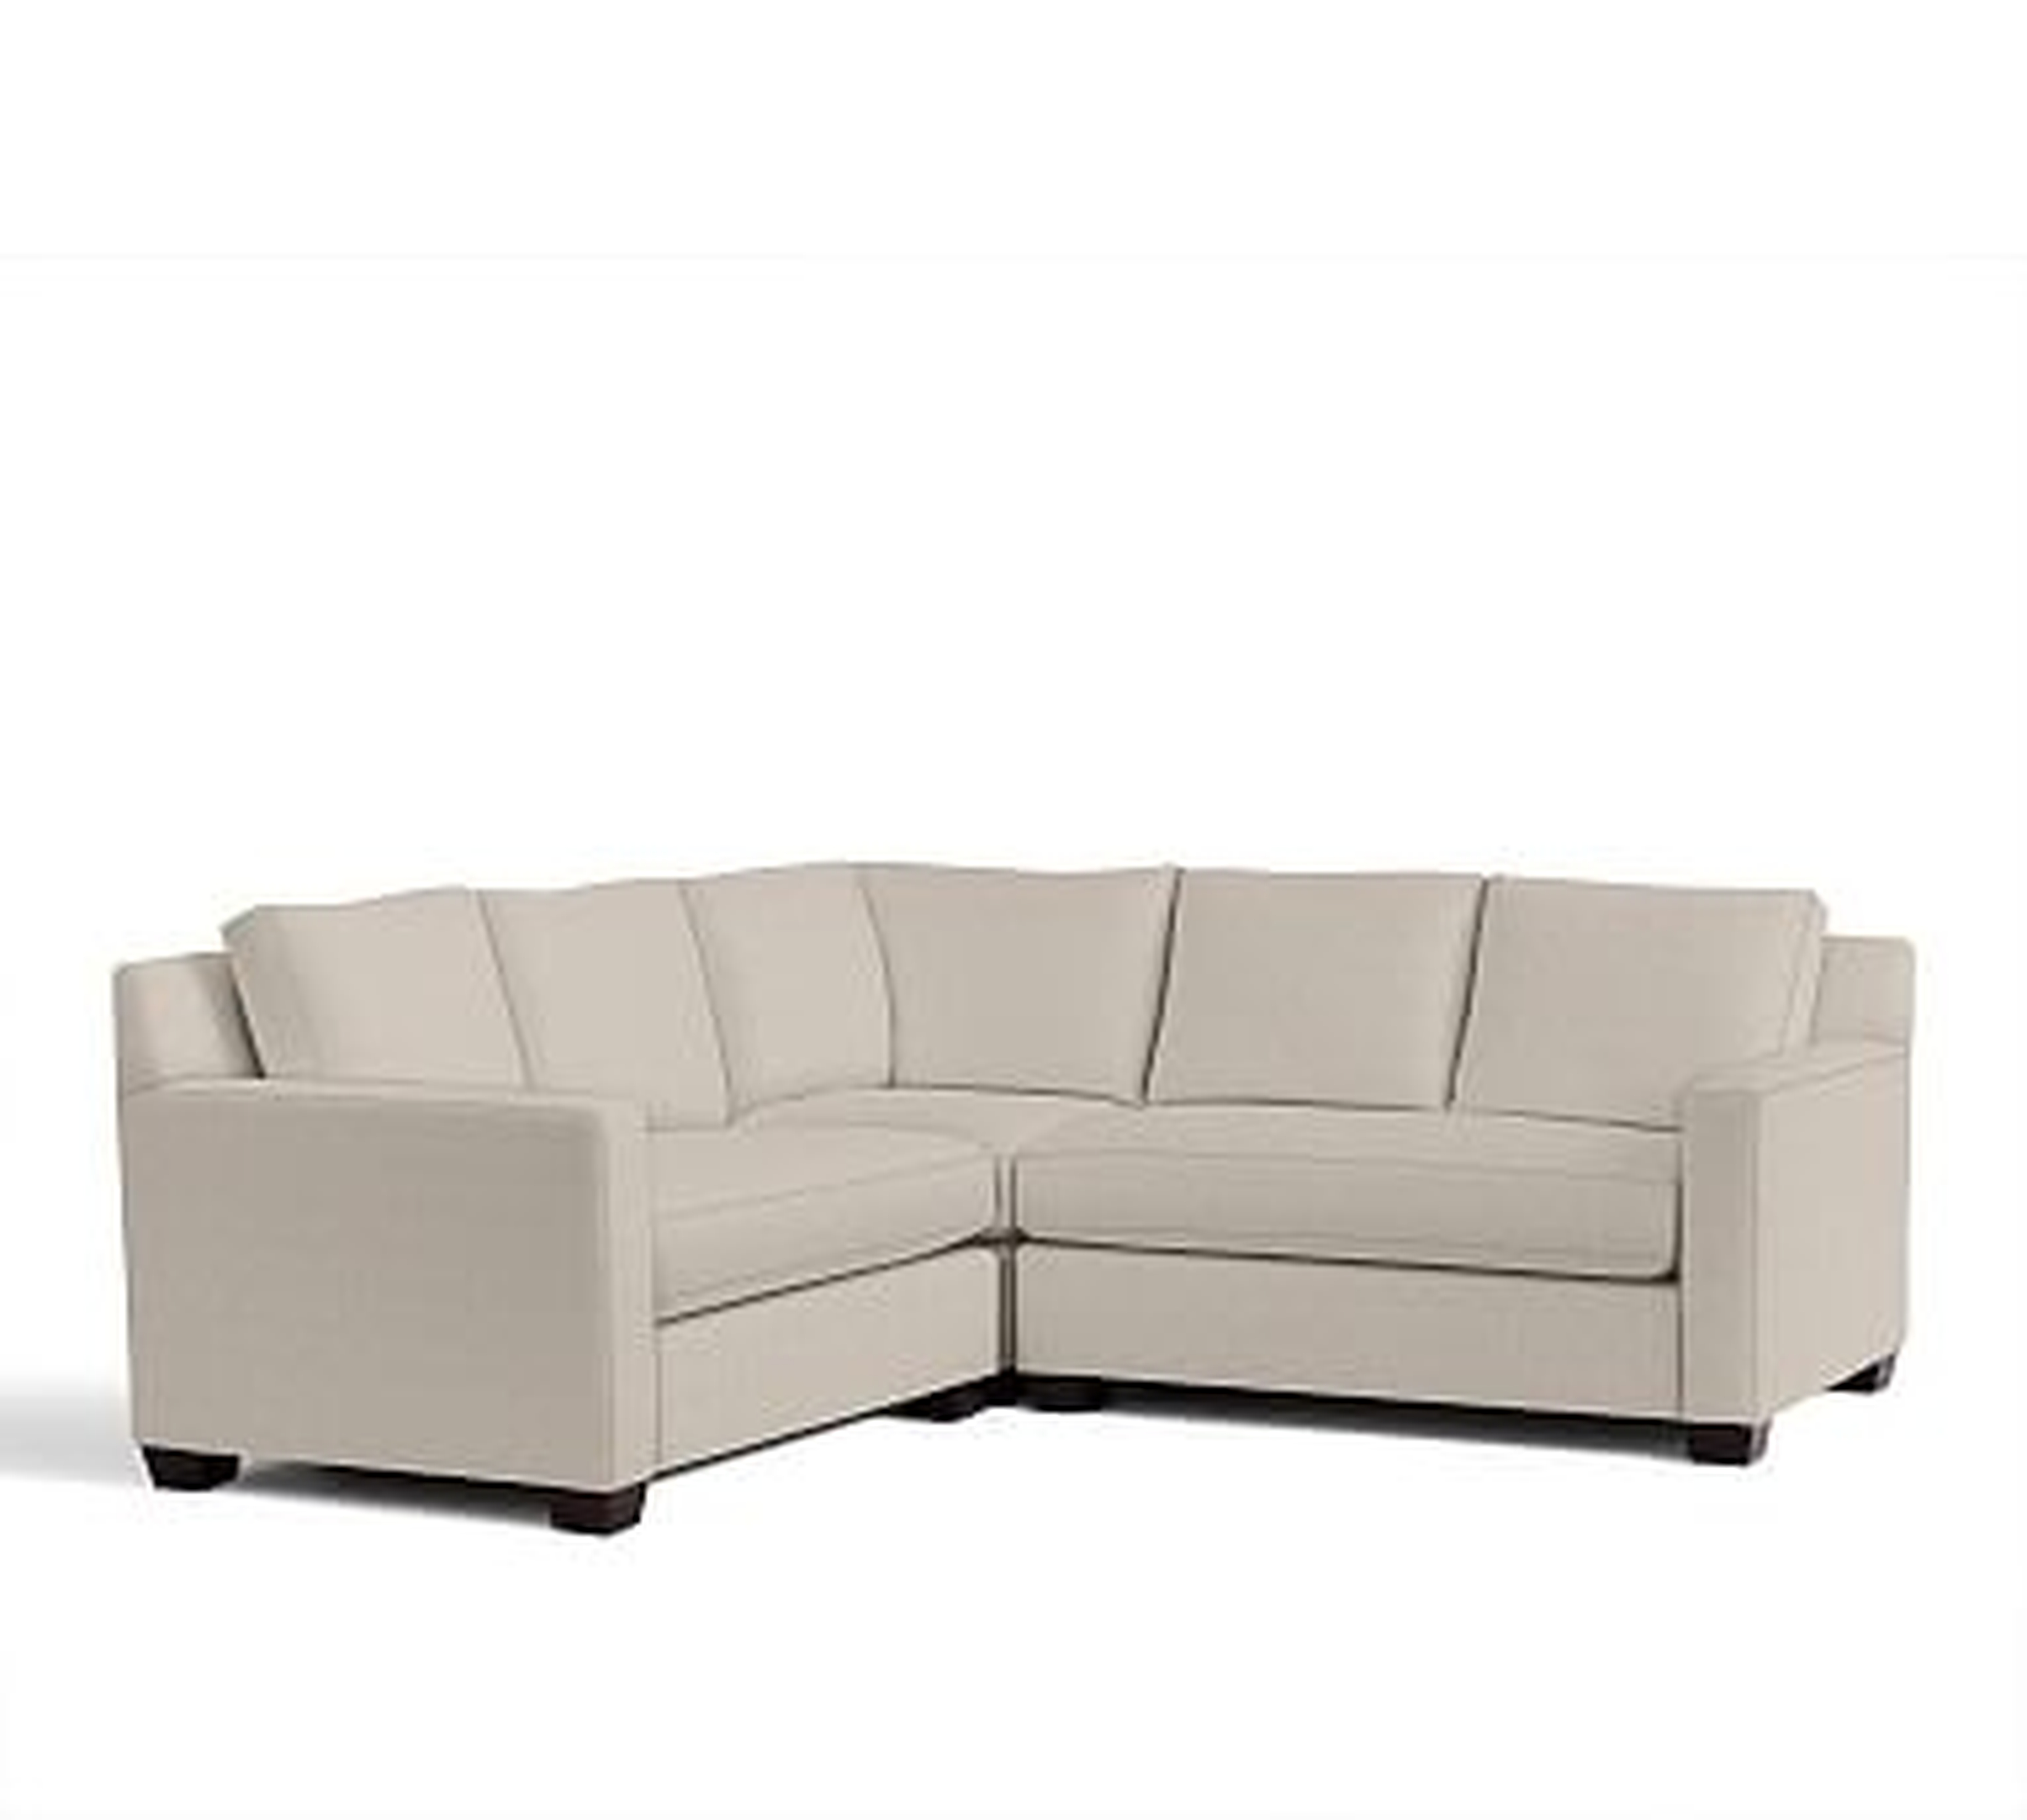 York Square Arm Upholstered 3-Piece L-Shaped Corner Sectional with Bench Cushion, Down Blend Wrapped Cushions, Sunbrella(R) Performance Sahara Weave Oatmeal - Pottery Barn